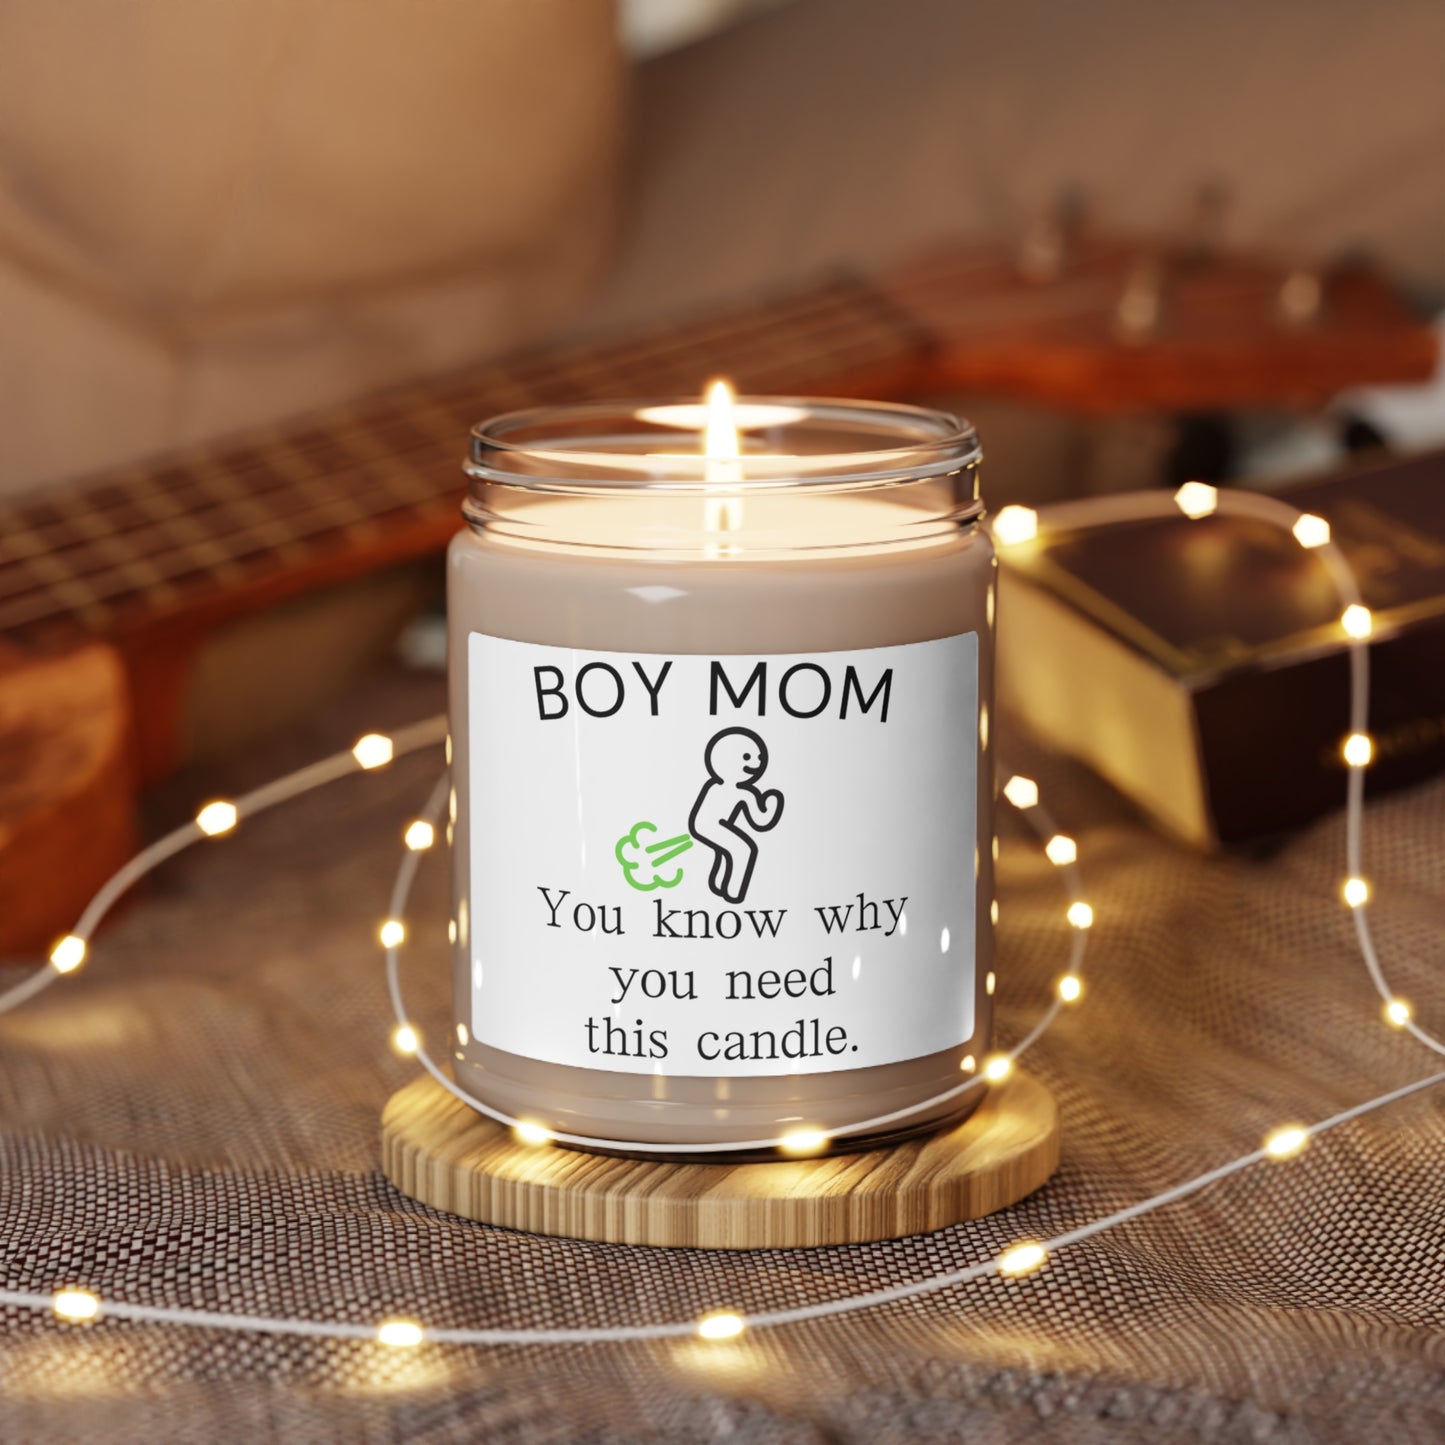 Scented Soy Candle, 9oz.  Boy mom, you know why you need this candle.